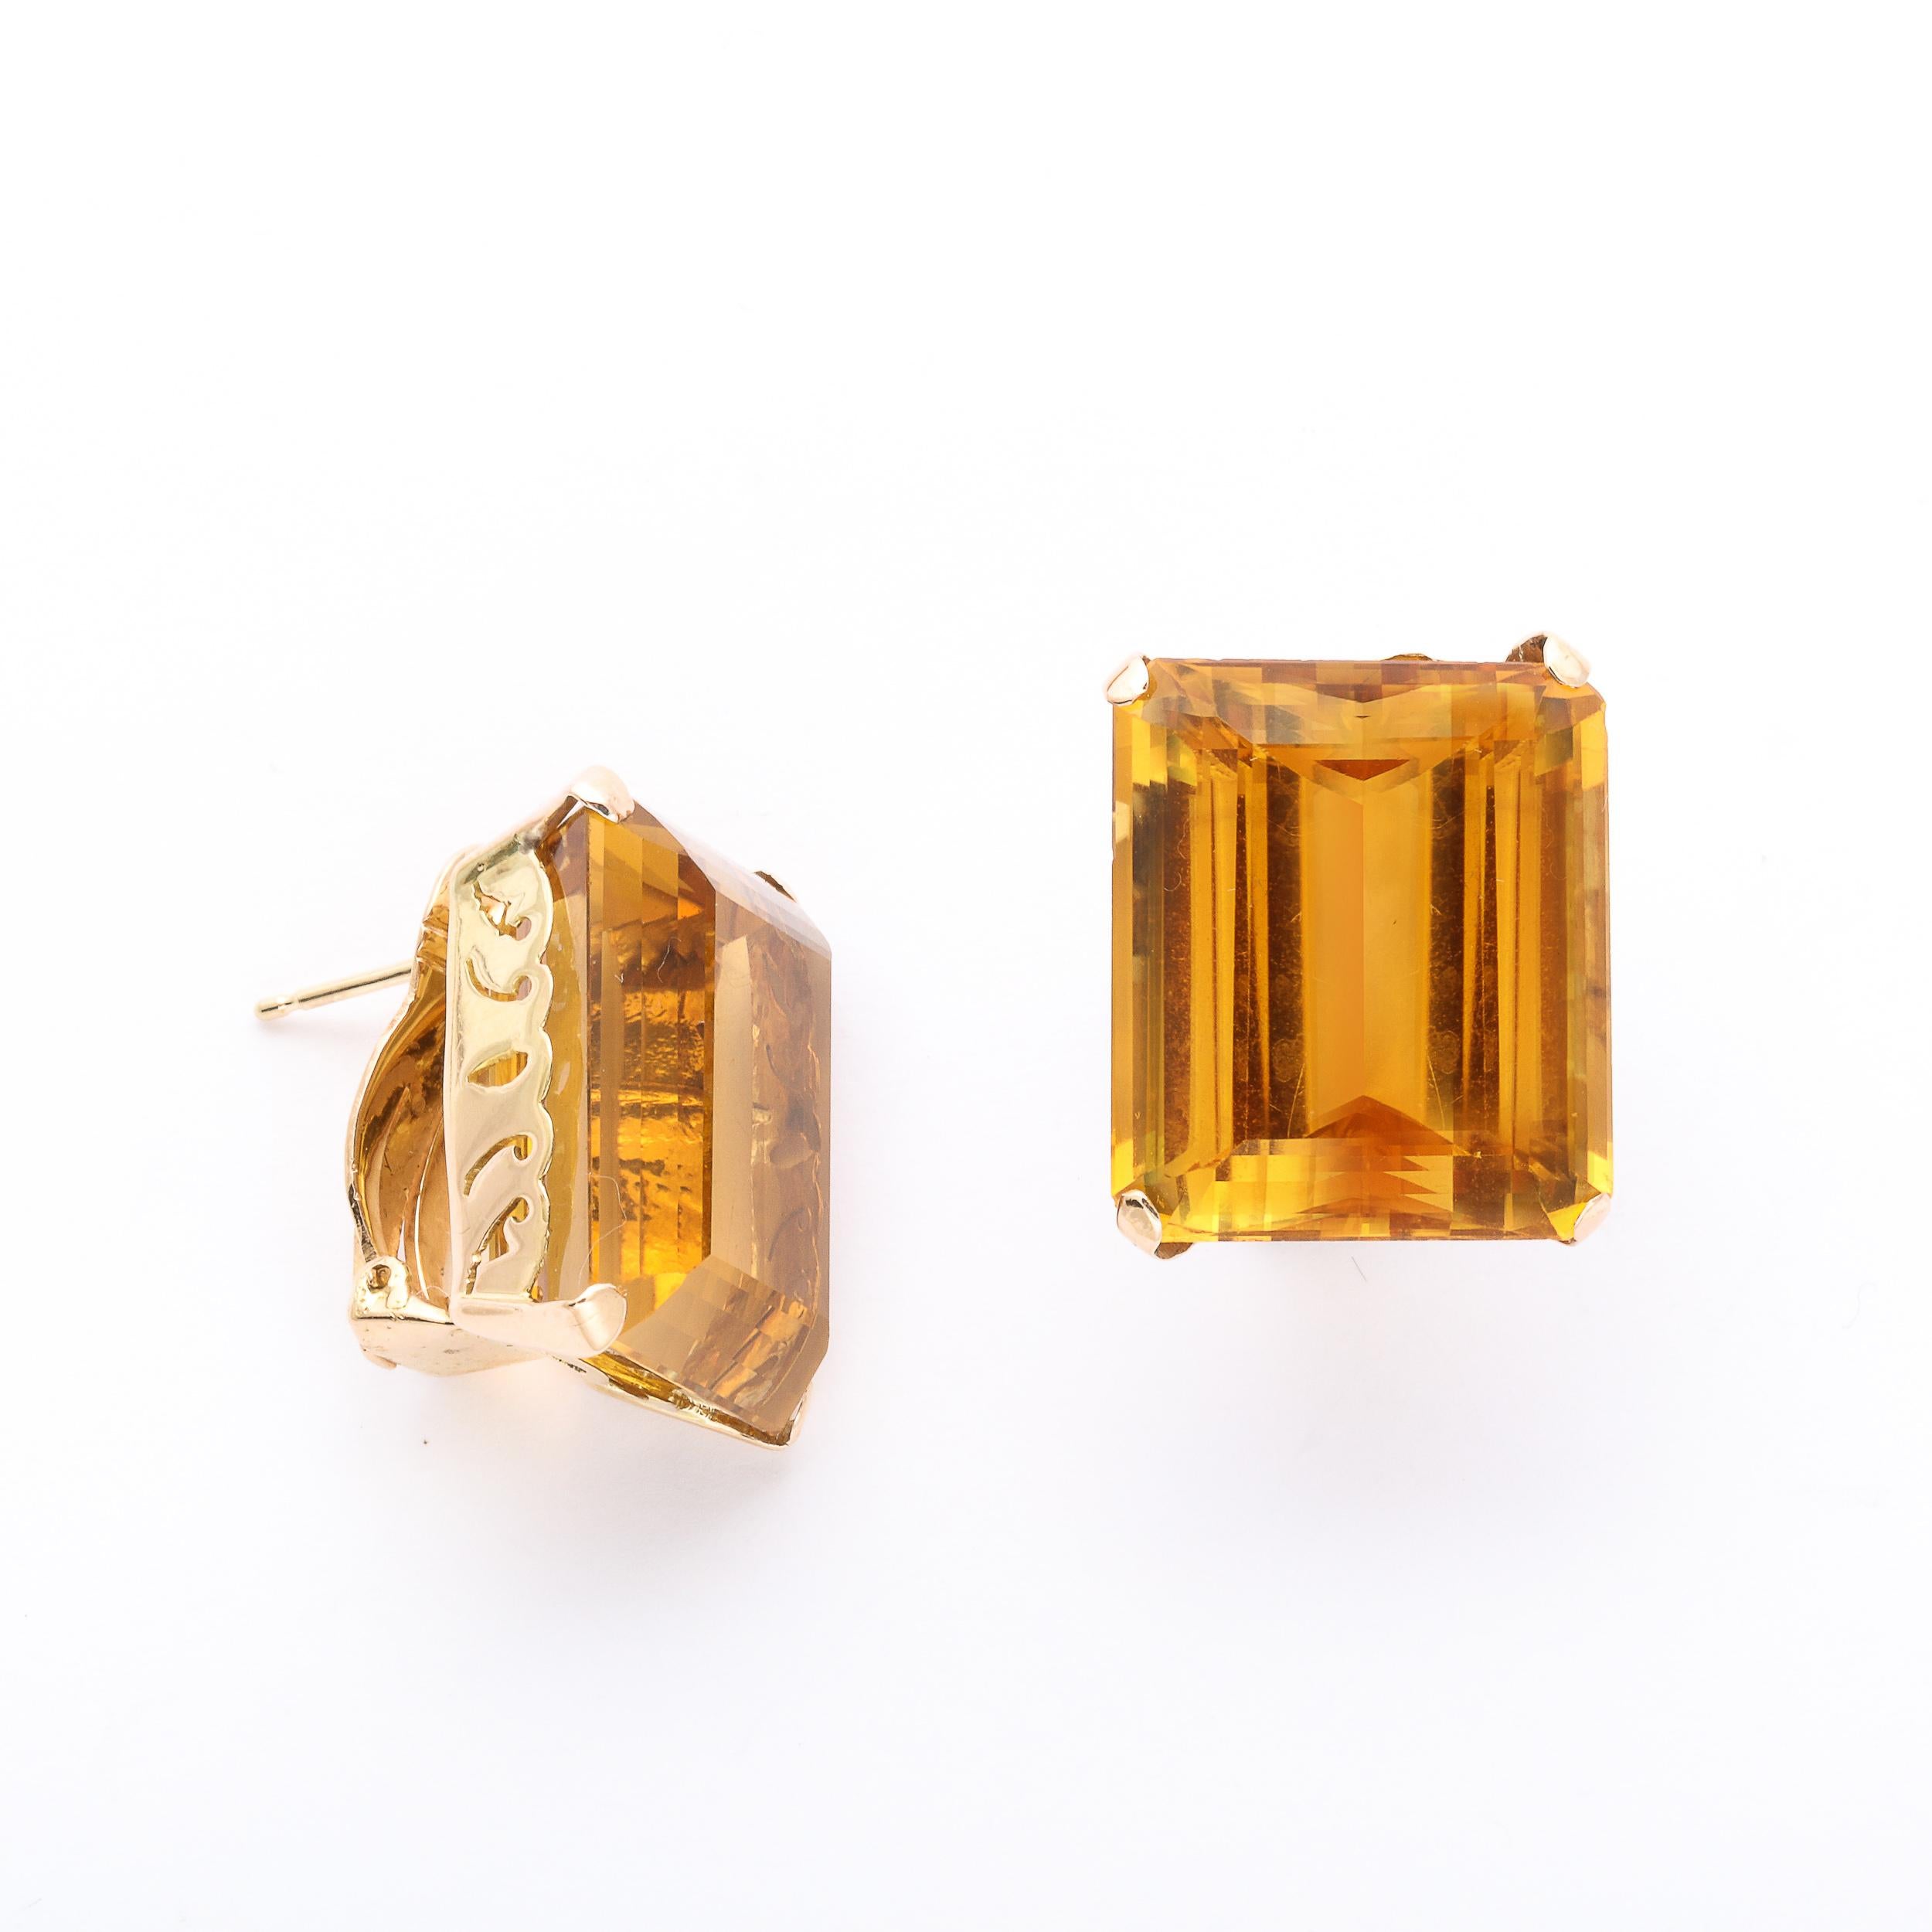 These Bold and glamorous earrings are set in 18k Rose gold  with 20 carats each of emerald cut citrines in a scrolling mount. They are fitted for pierced ears but can easily be converted back to just clip on. These earrings are very 1940s Hollywood